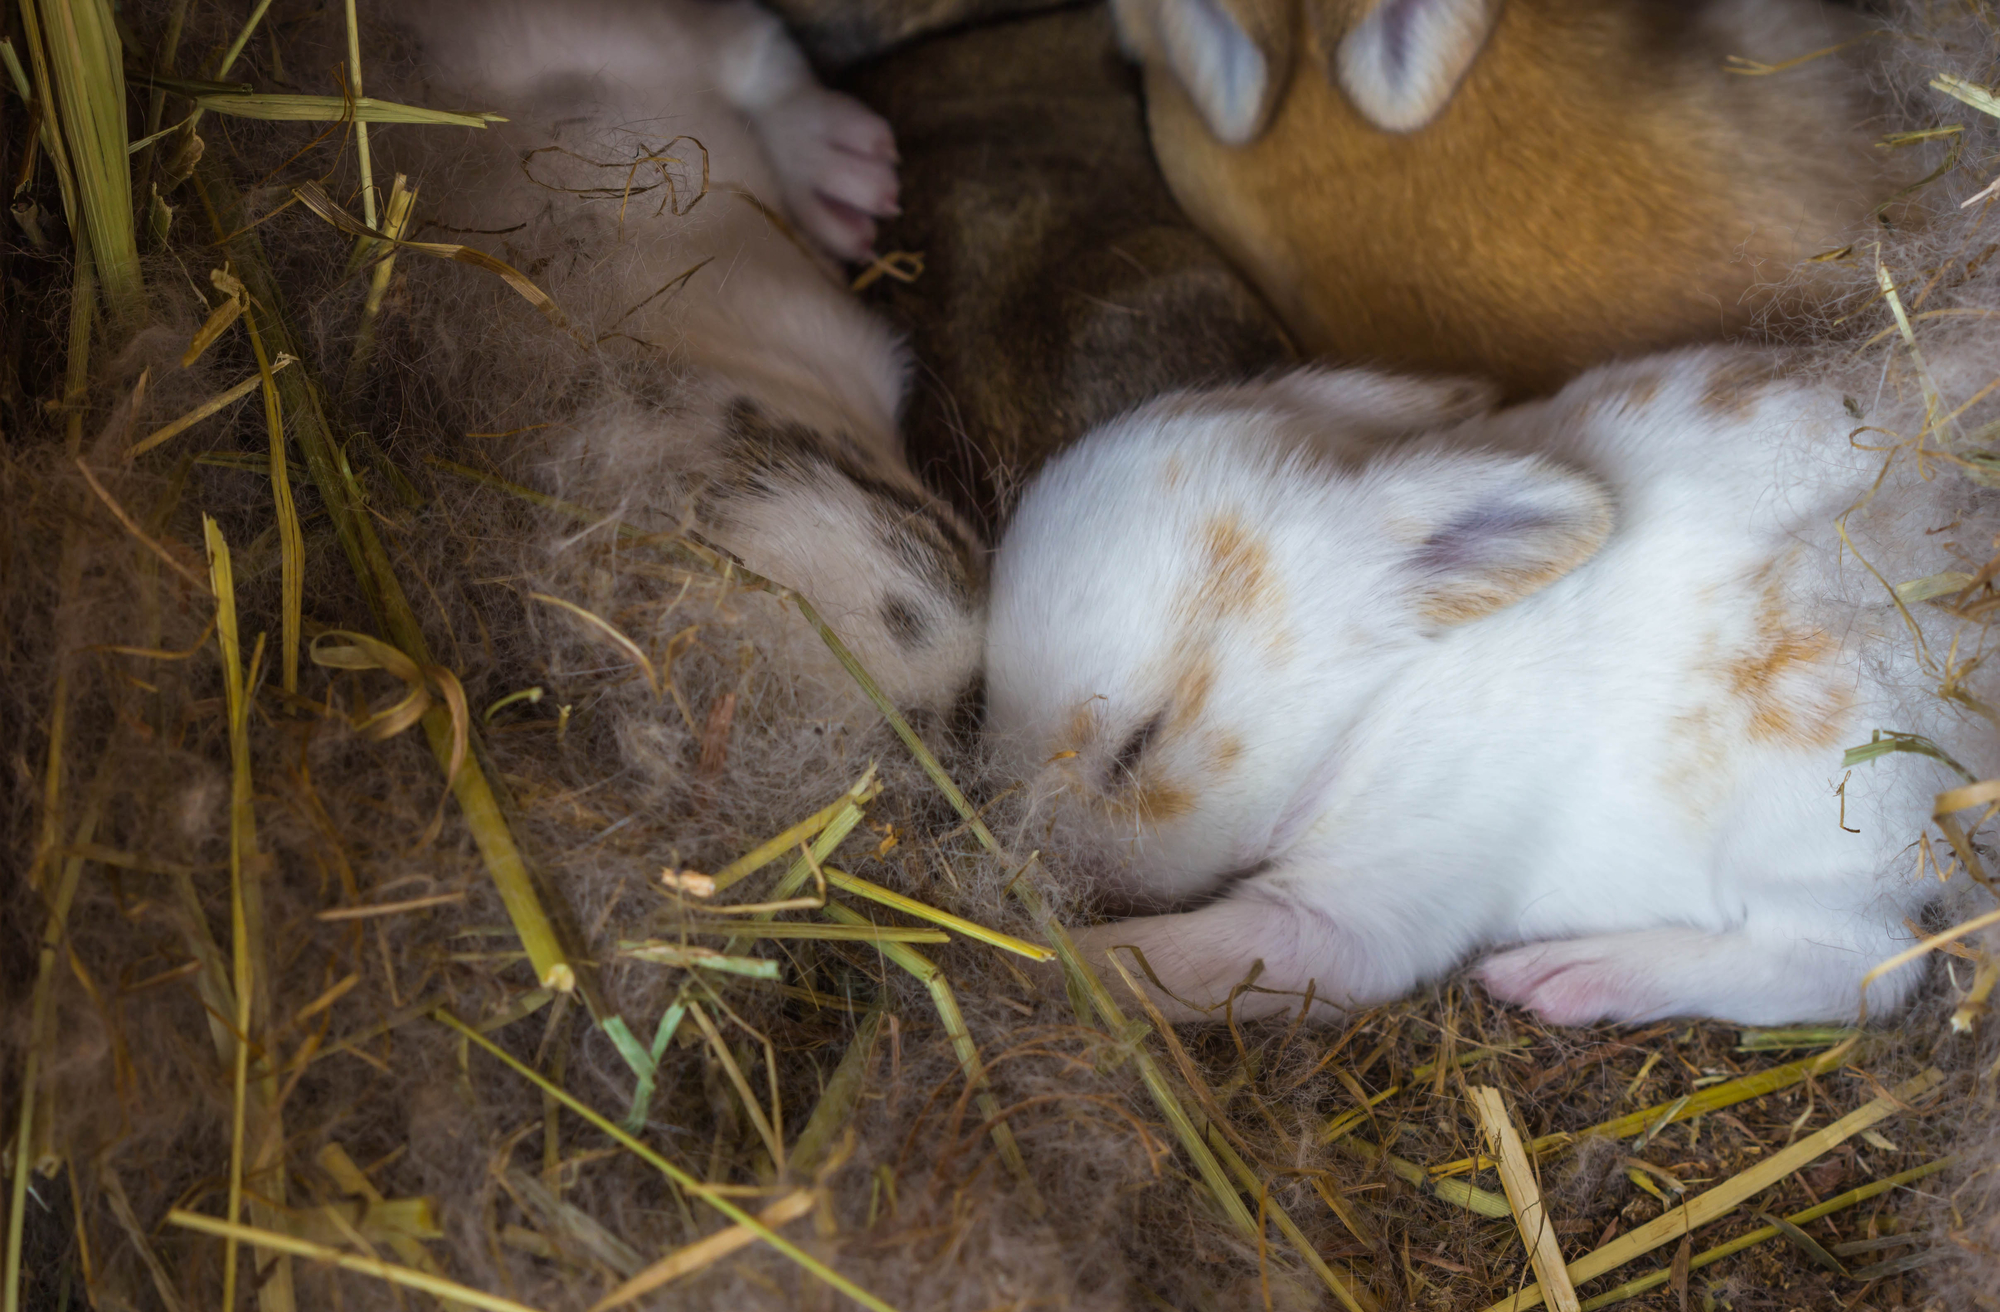 How Long After Birth Is A Baby Rabbit Ready To Leave Its Mother?